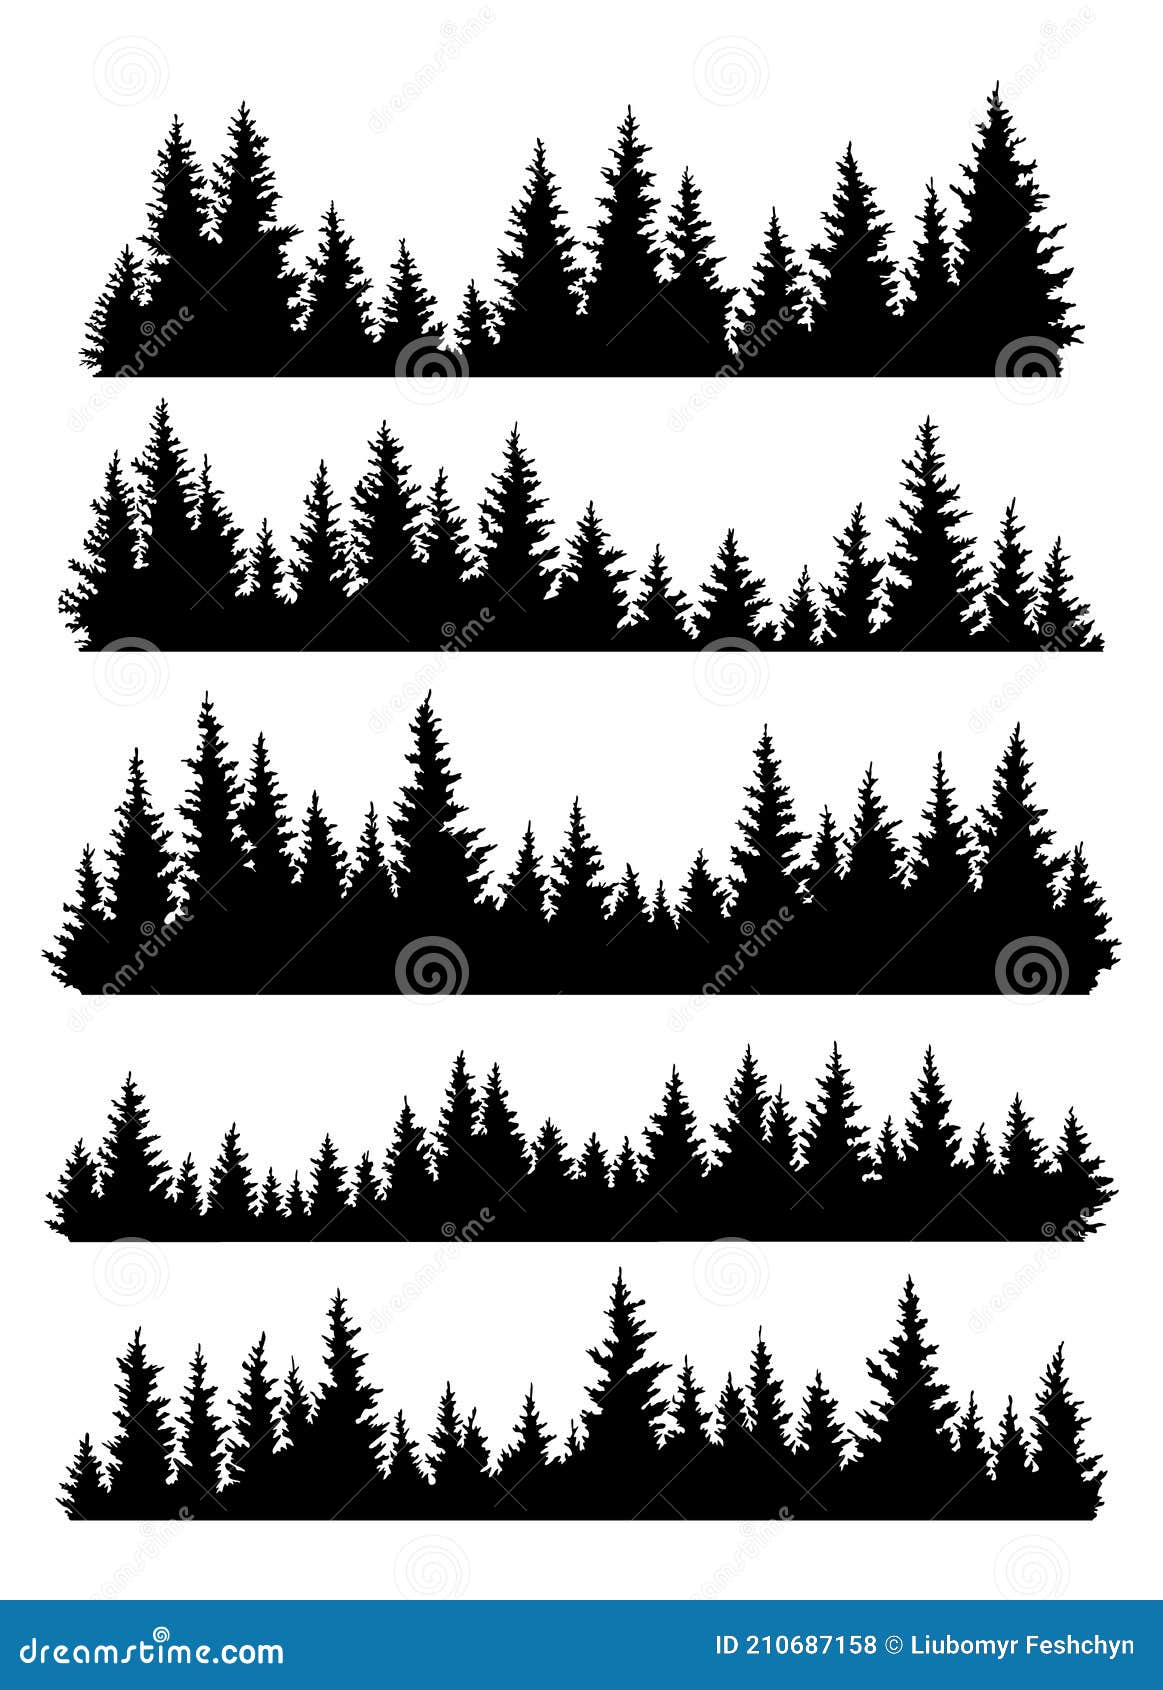 set of fir trees silhouettes. coniferous spruce horizontal background patterns, black evergreen woods 